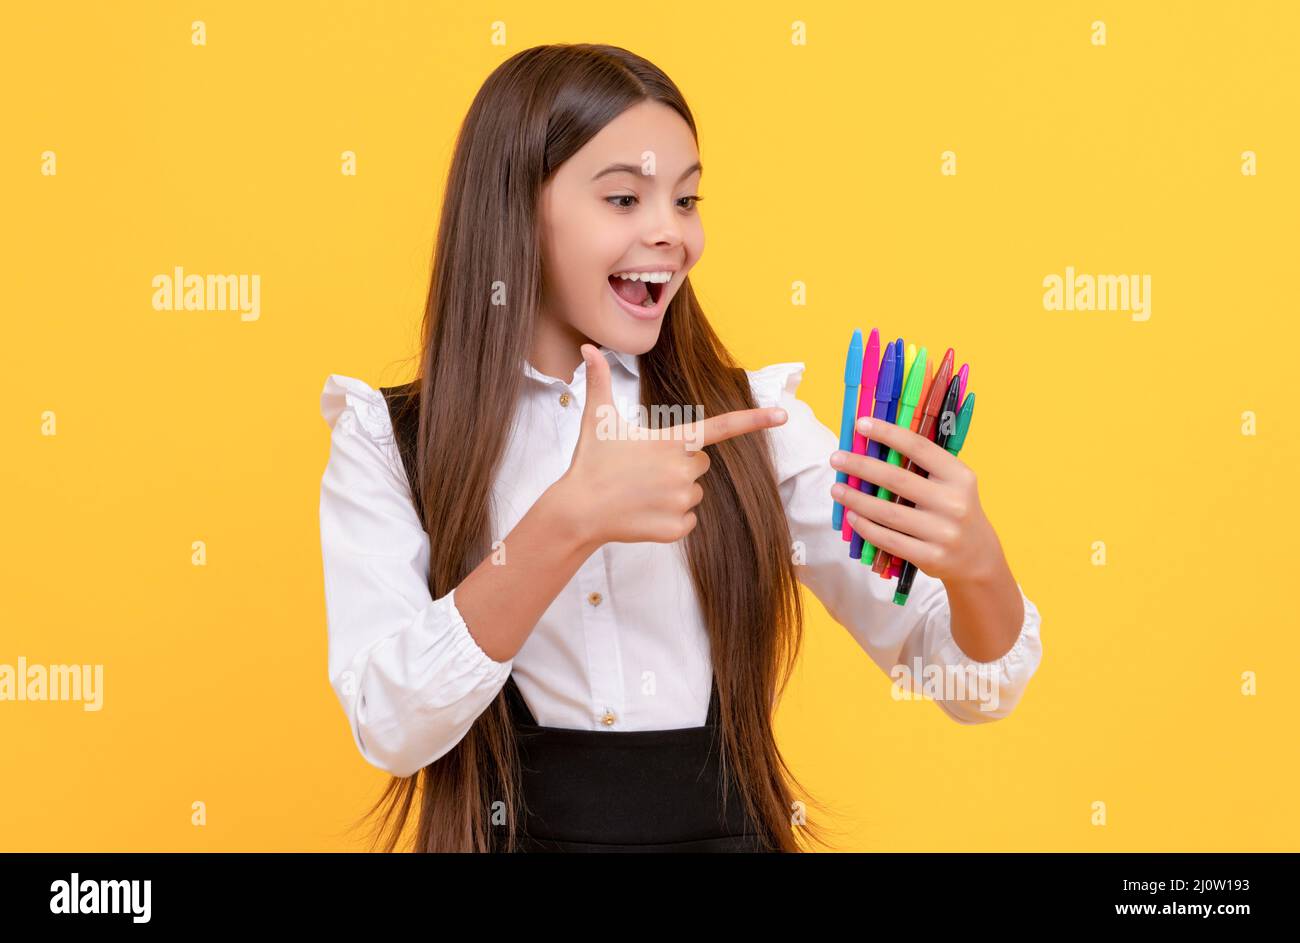 Get one in every color. Happy kid point finger gun at felt pens. The best felt pens you ever had. Stock Photo